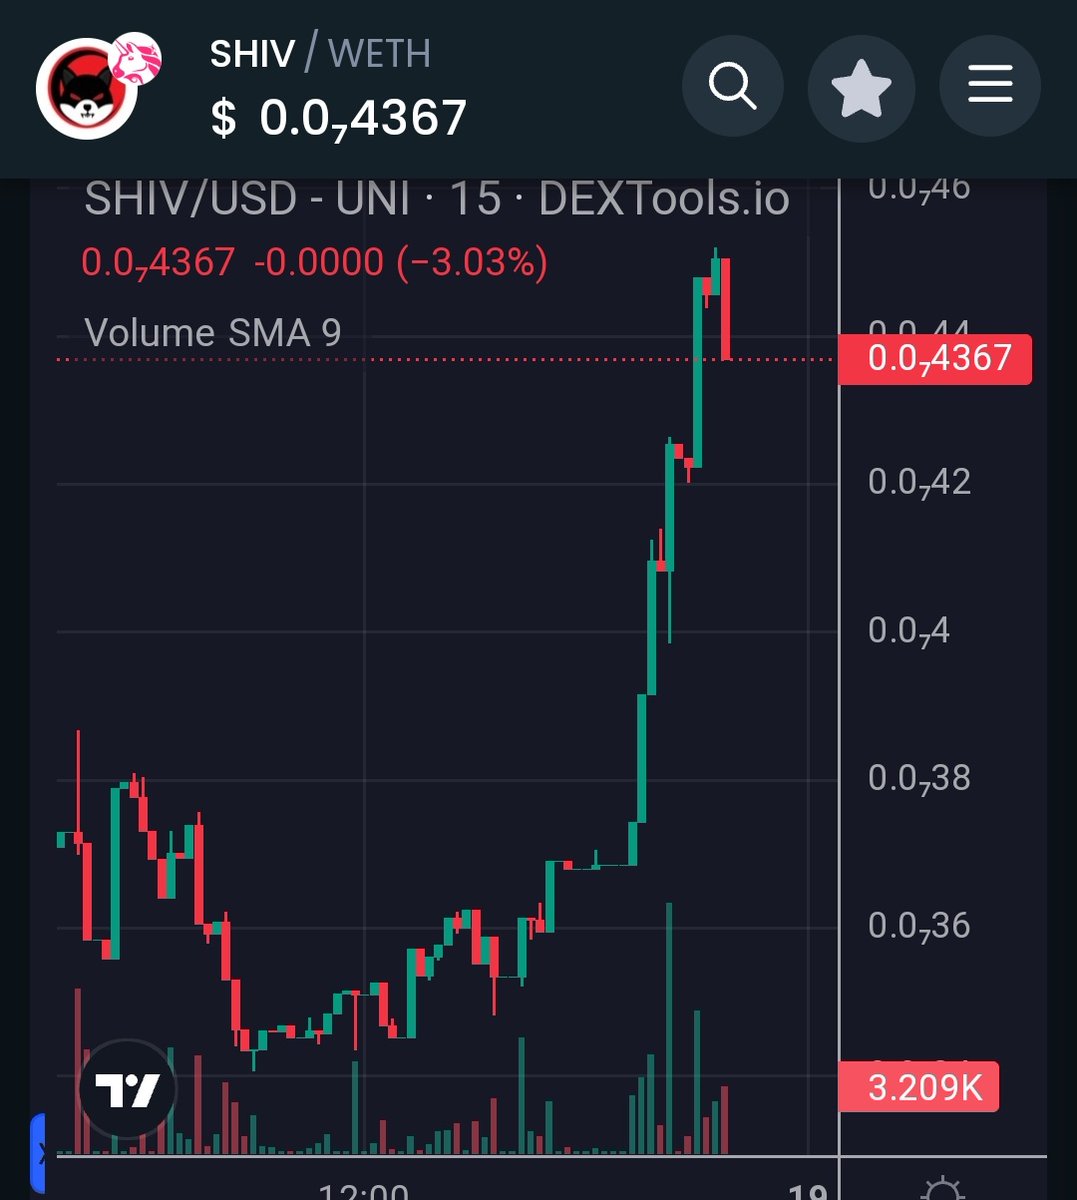 @cryptojourneyrs I hope you are buying $Shiv cause we are pamping and trending baby 🔥🚀🚀🚀 @ShivTokenETH 3 weeks old $3m mc CG✅️ CEX✅️ CMC✅️ Staking✅️ ShivaSwap✅️ And you're still doubting?😂